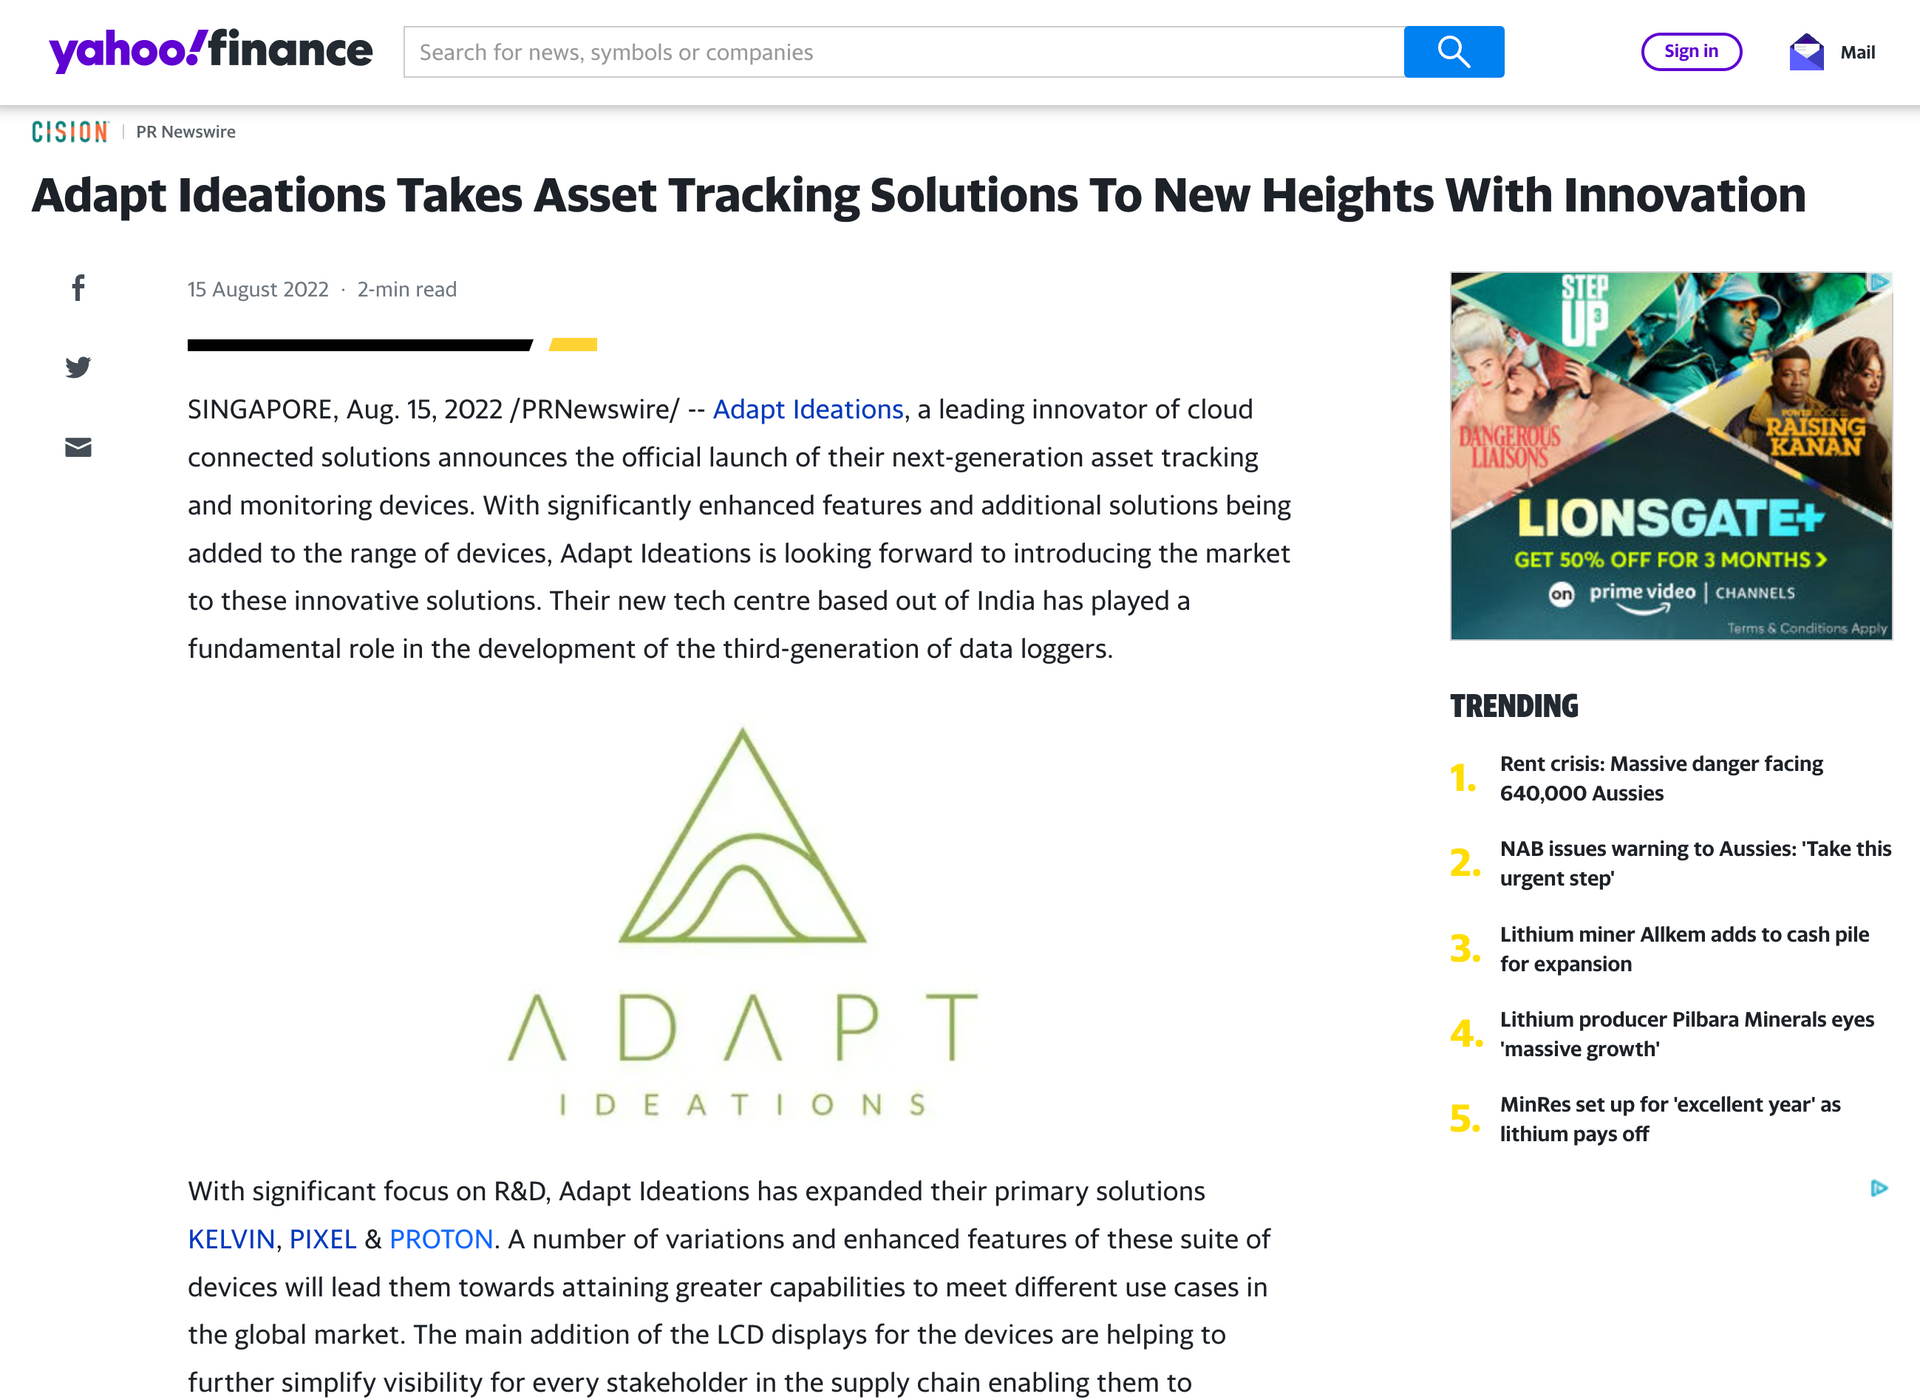 A screenshot of a yahoo finance article about adapt ideas taking asset tracking solutions to new heights with innovations.